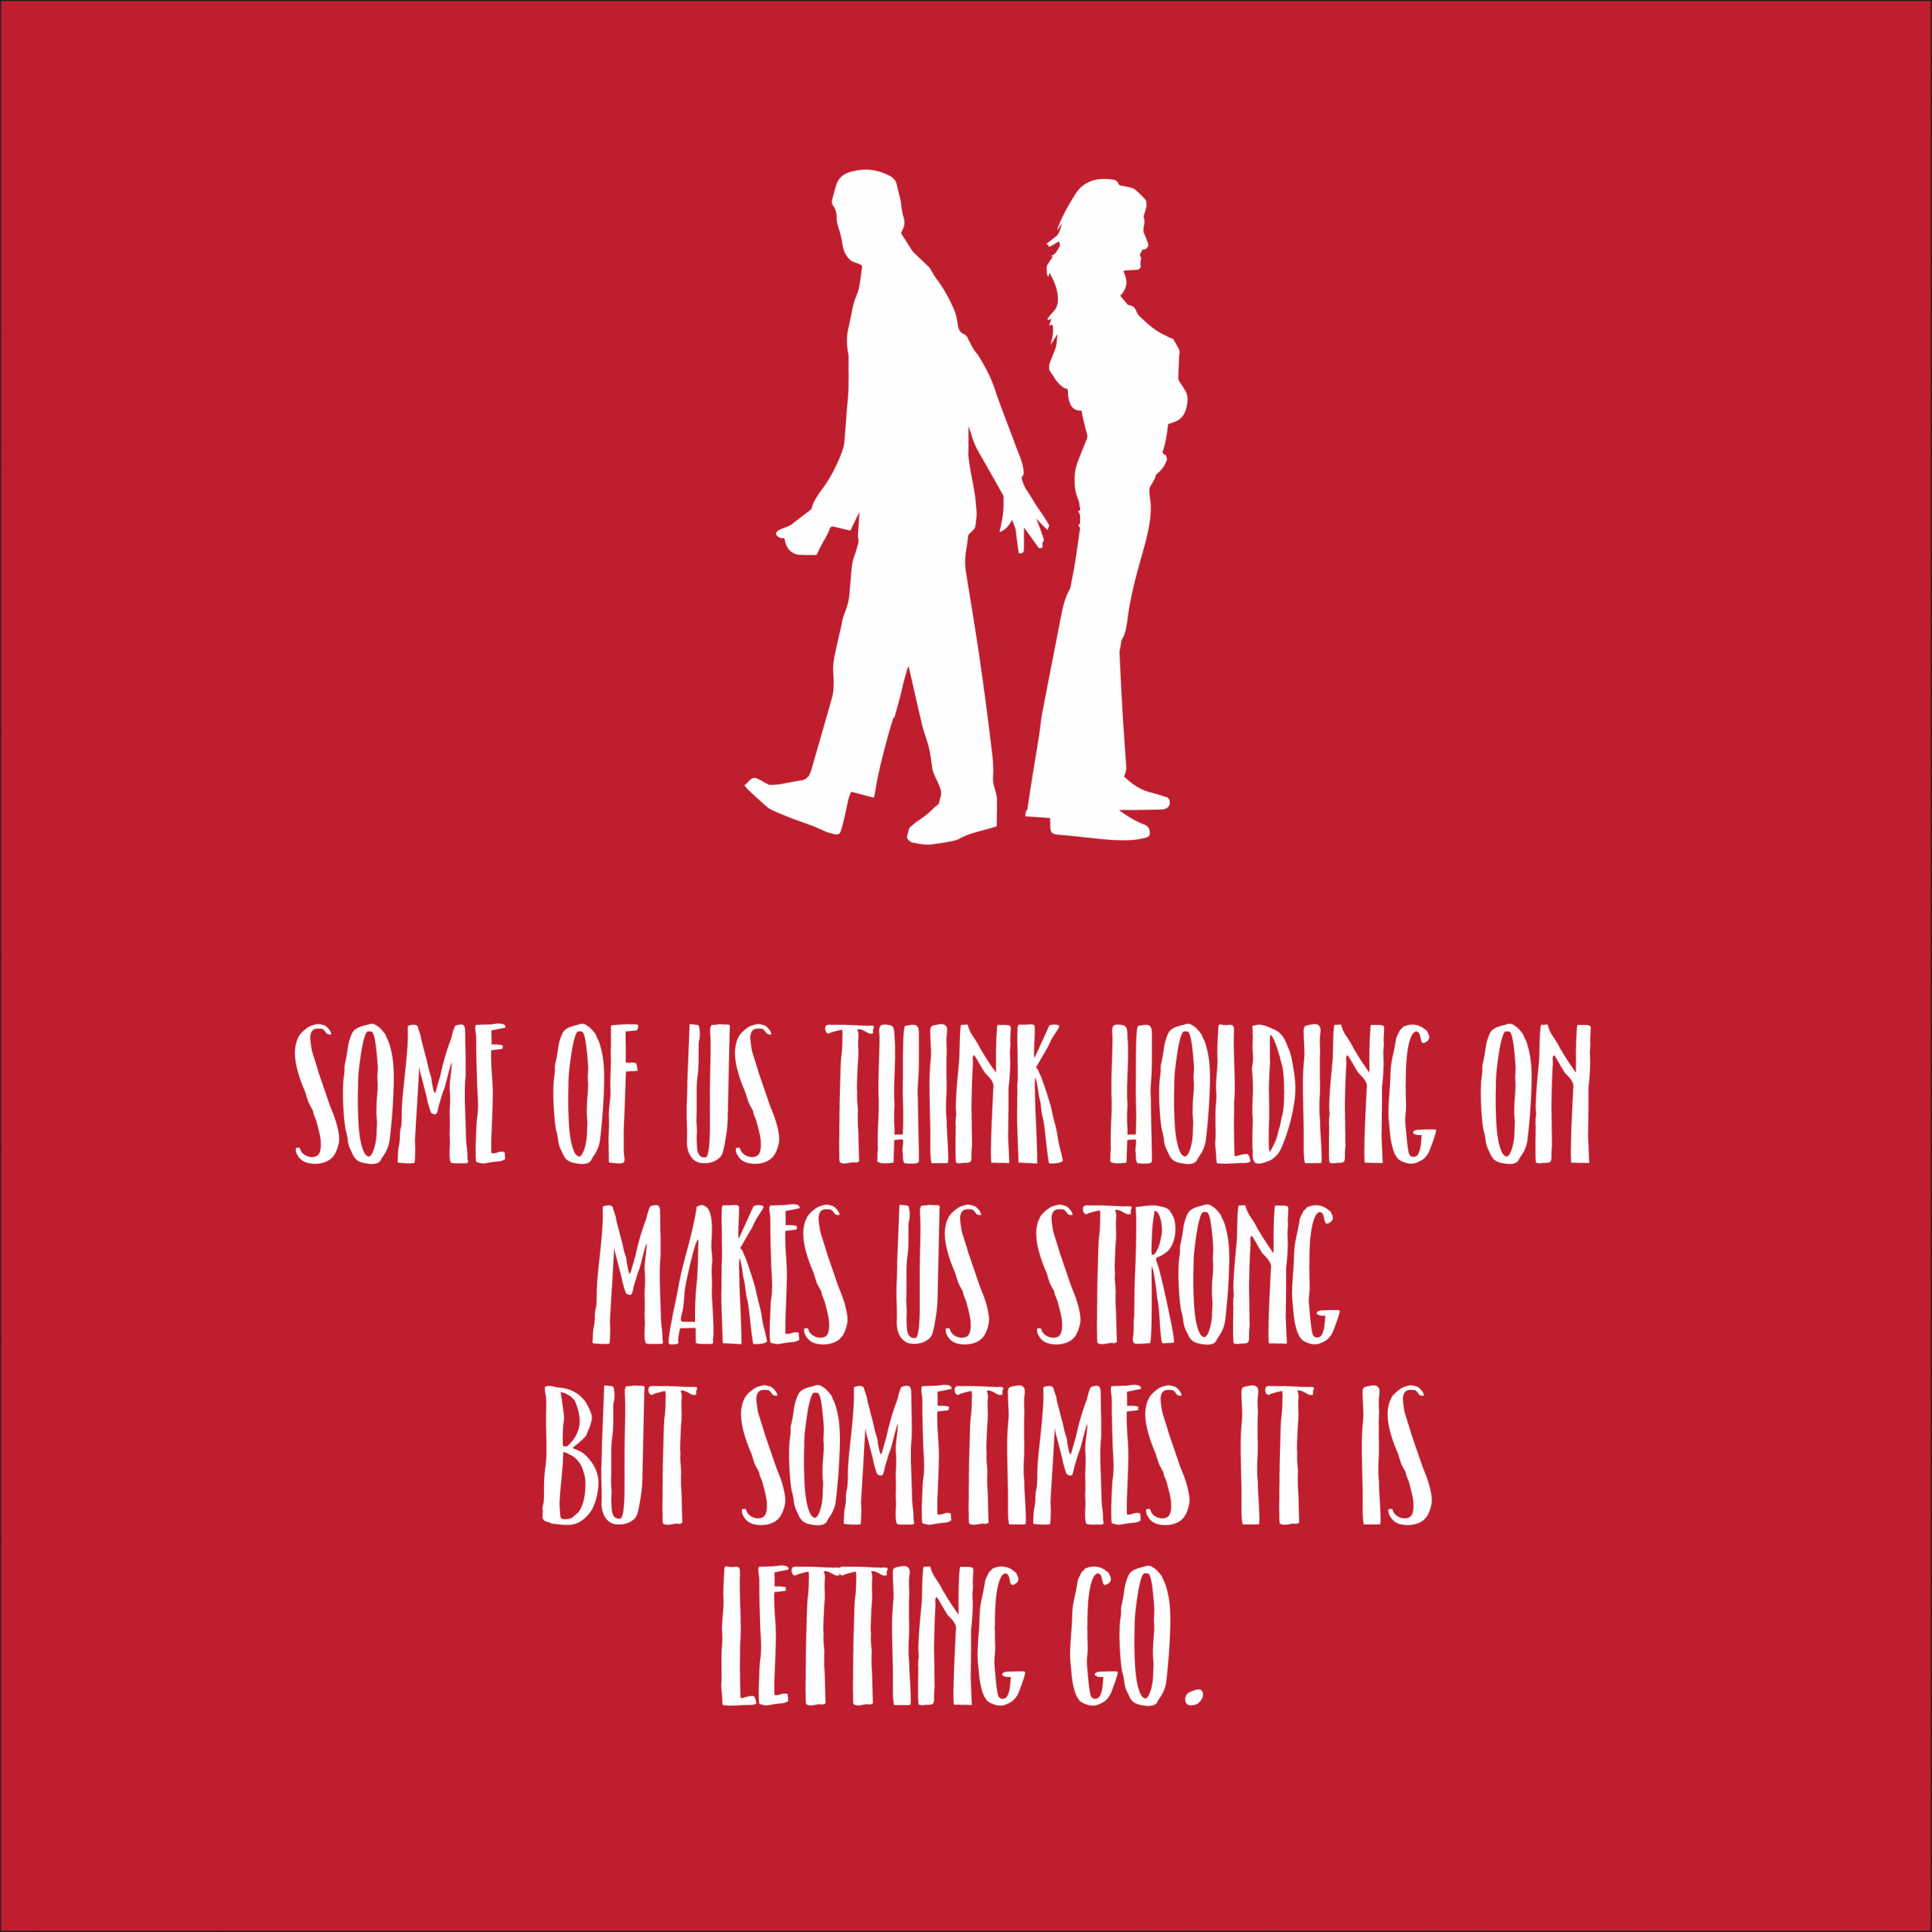 Relationship Quotes Images
 End of Relationship Quotes lovequotesmessages